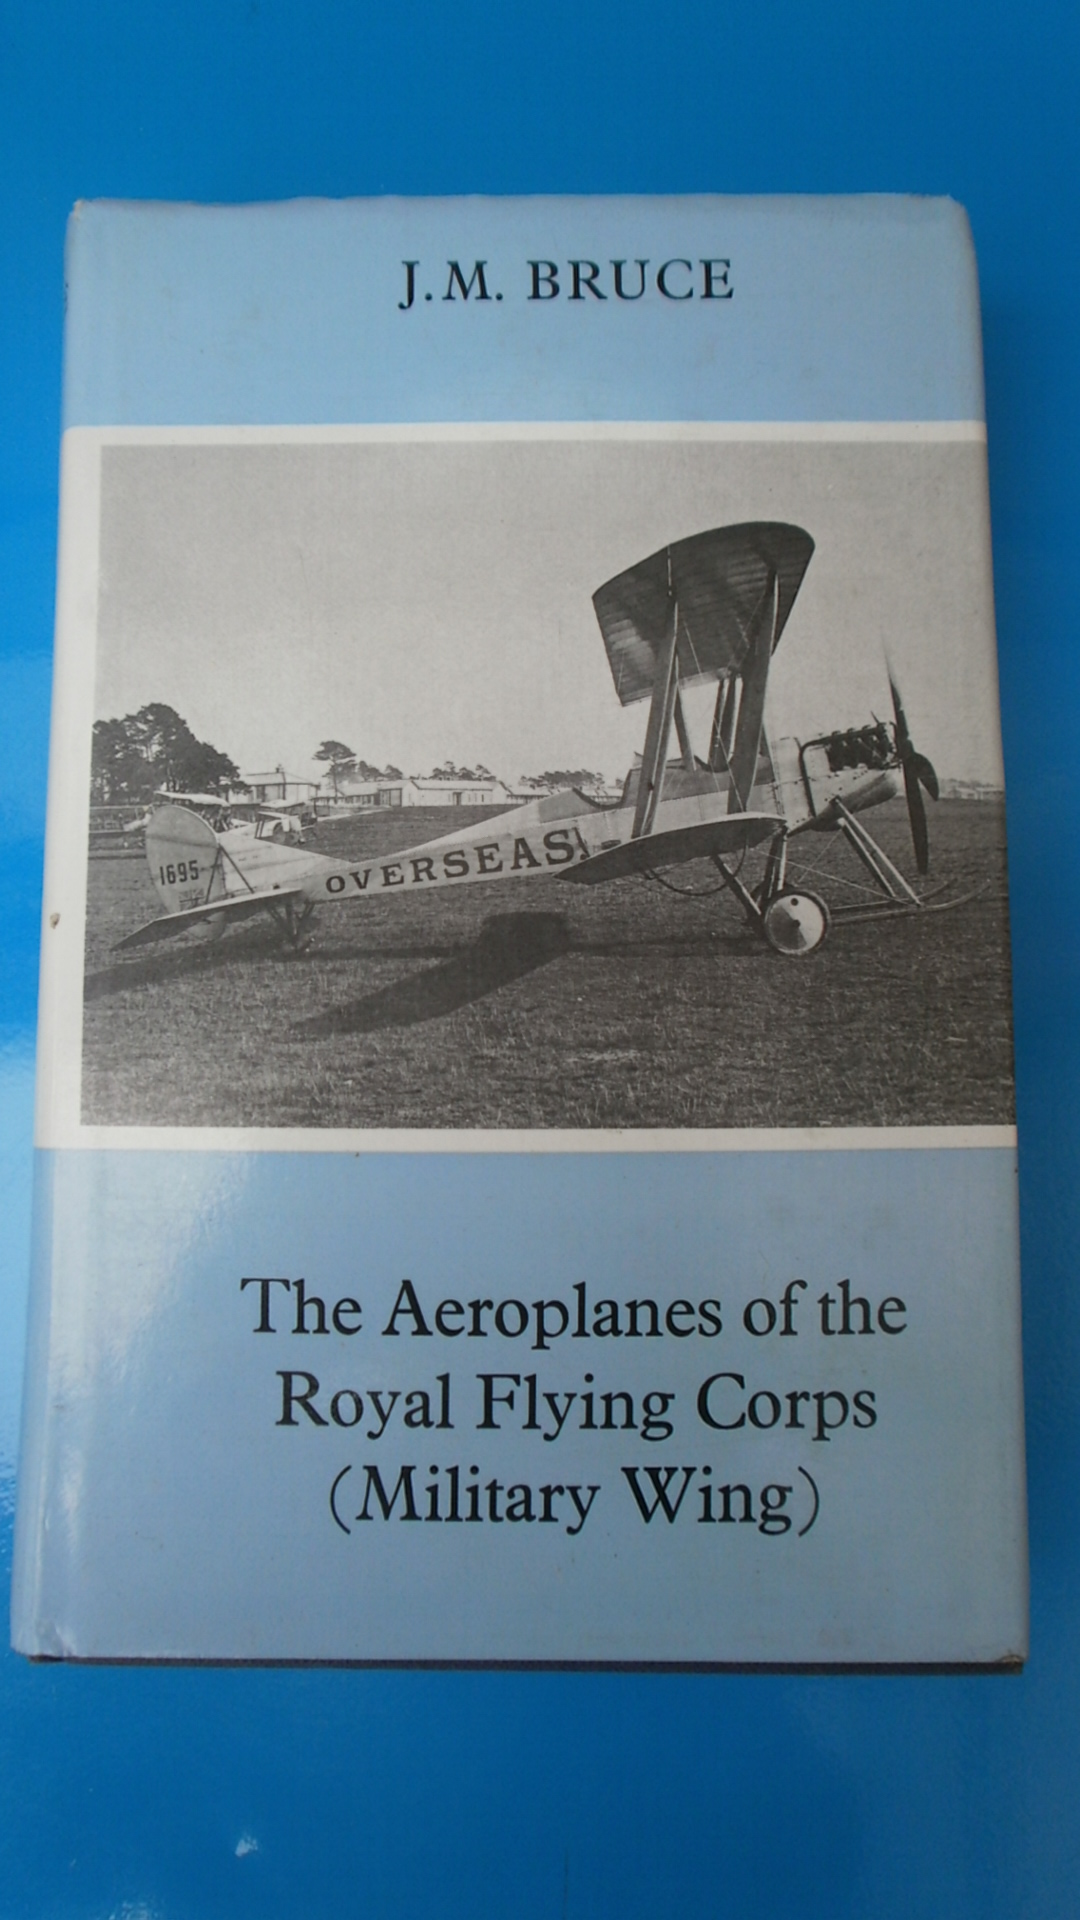 THE AEROPLANES OF THE ROYAL FLYING CORPS (MILITARY WING) BY J. M. BRUCE